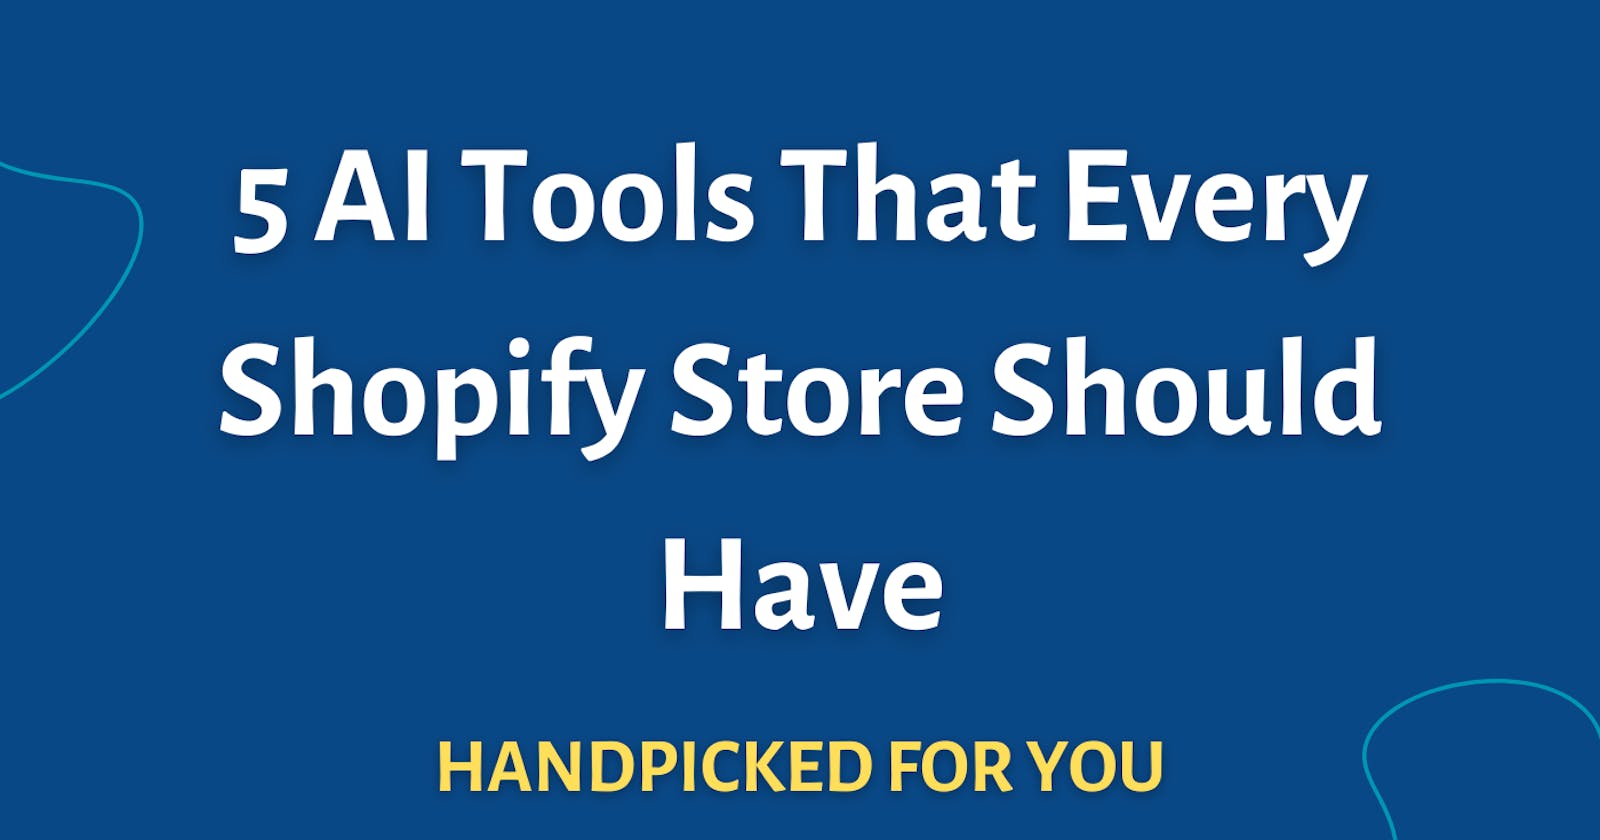 5 AI Tools That Every Shopify Store Should Have